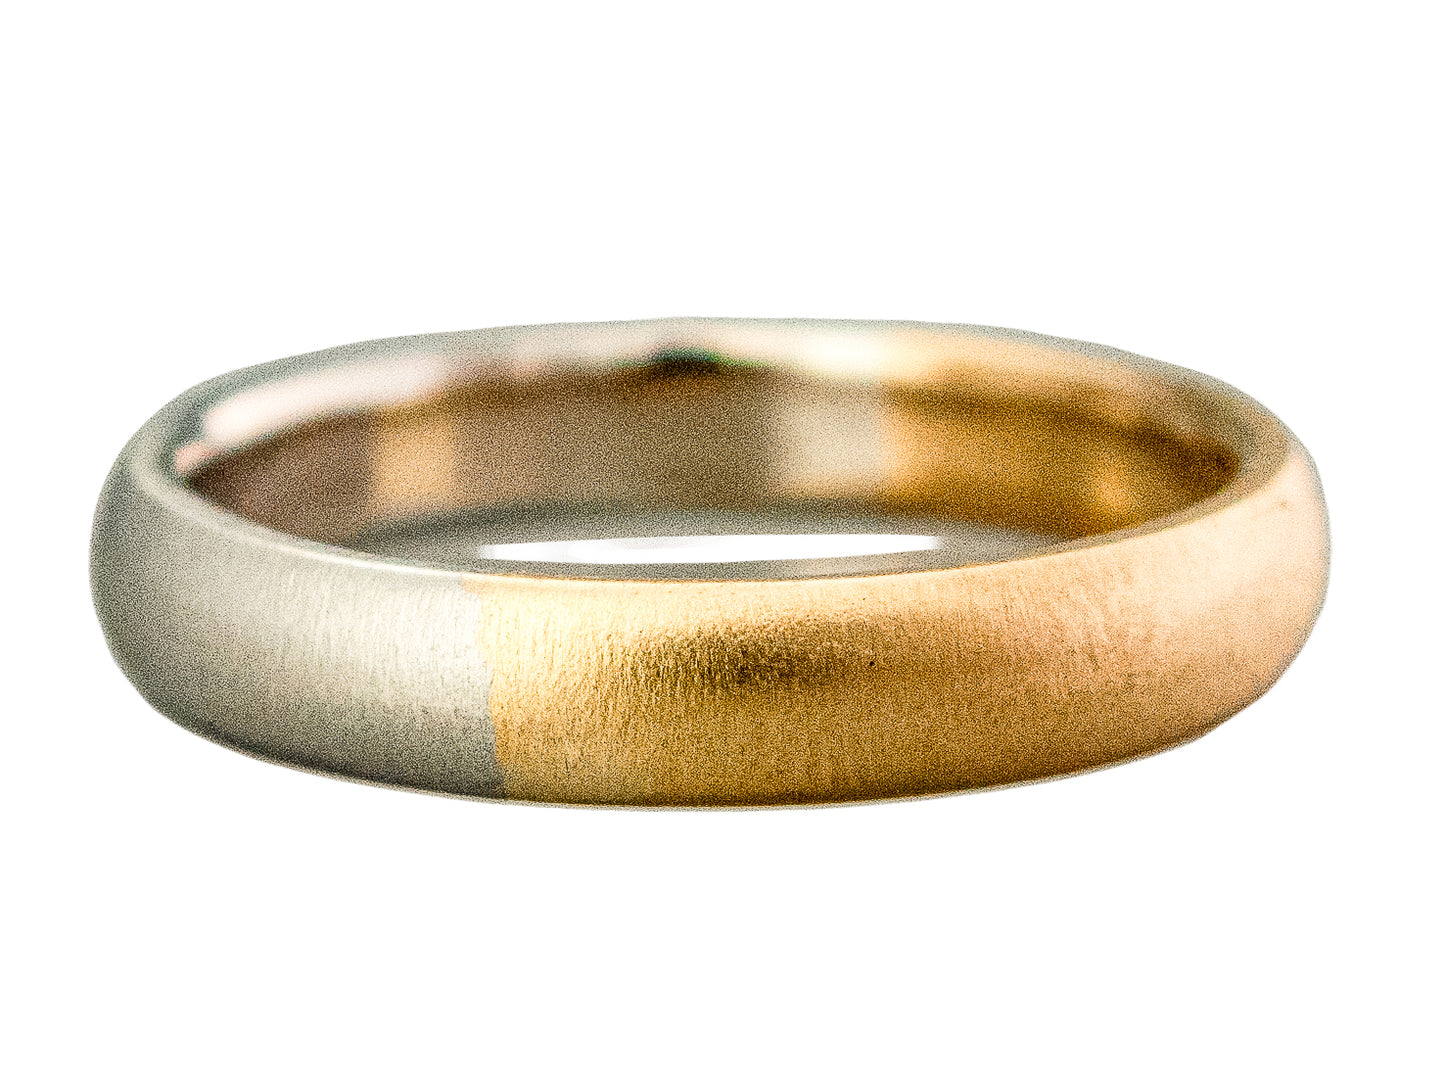 Platinum and 18k Yellow Gold Comfort Fit Wedding Ring | 4mm wide 50/50 Partnership in Mixed Precious Metals